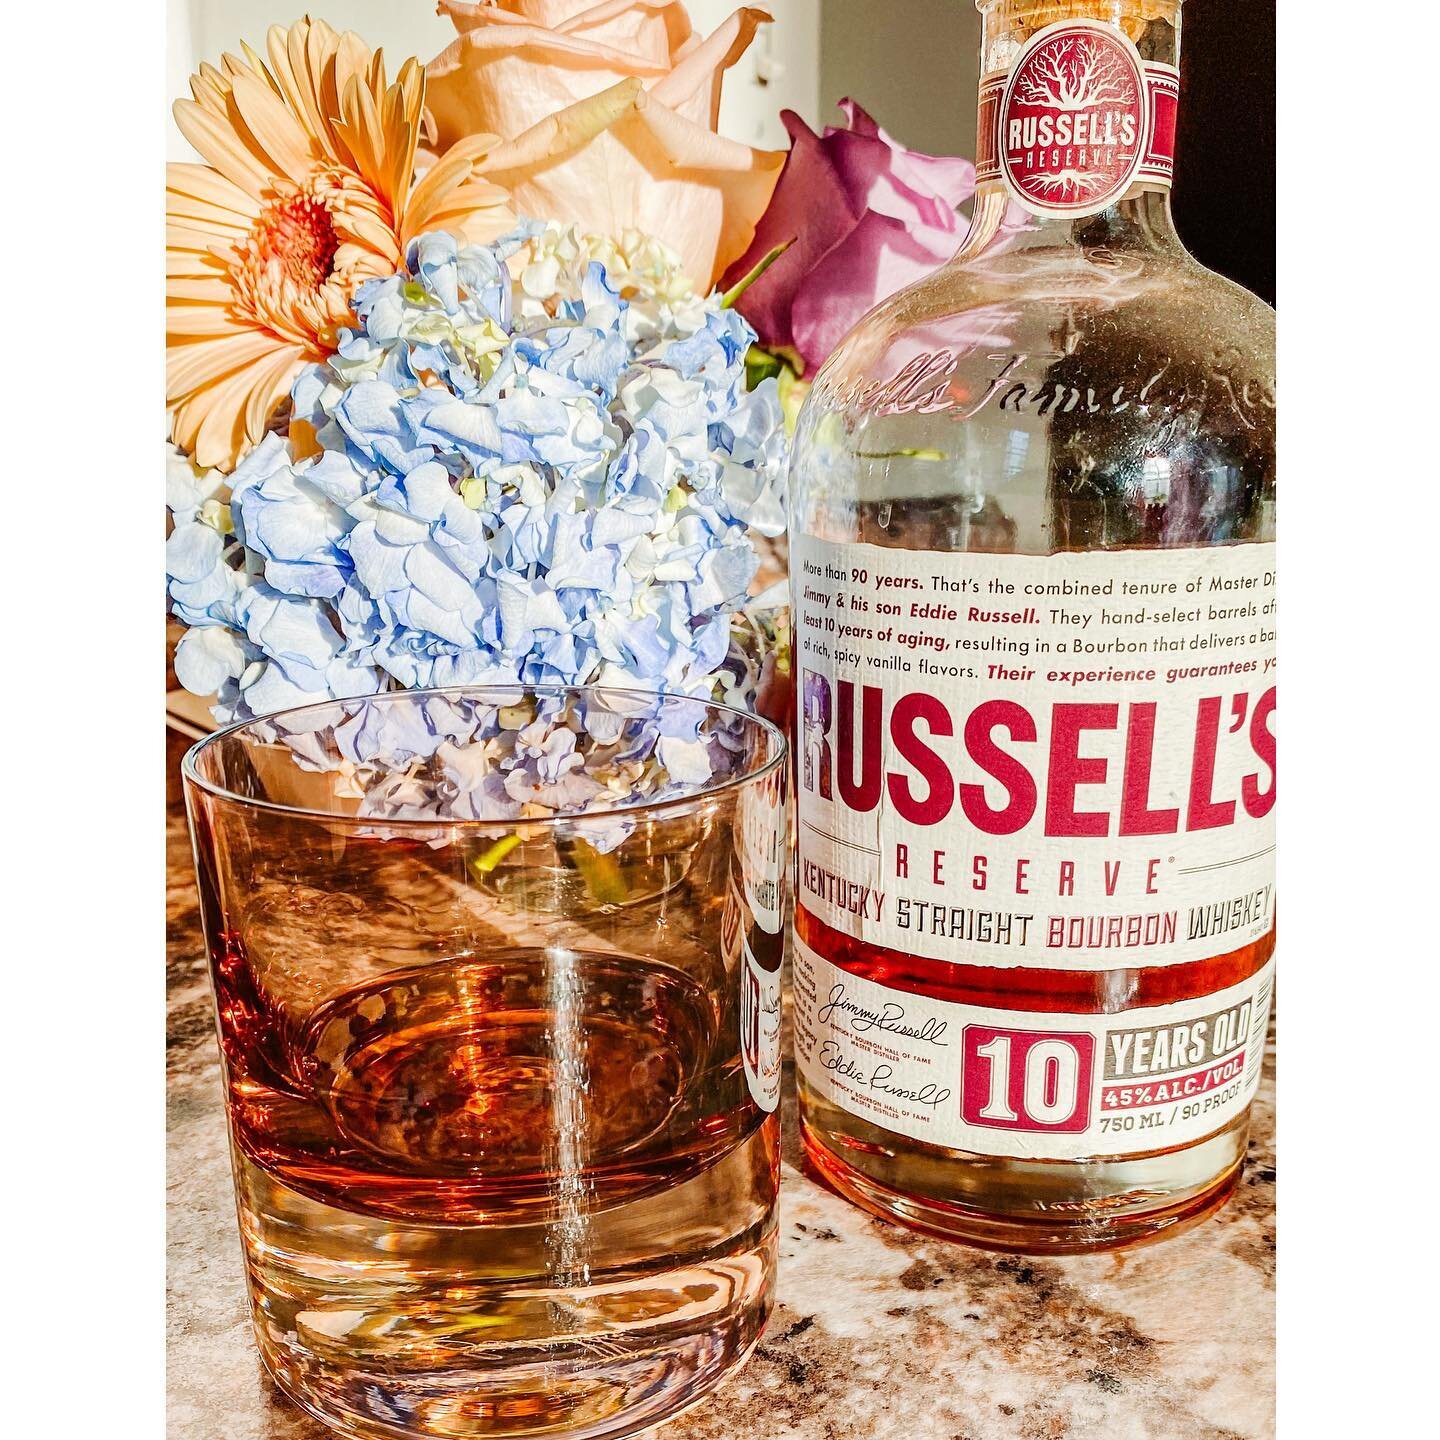 @russellsreservebourbon for this fine tuesday !! what are you having?